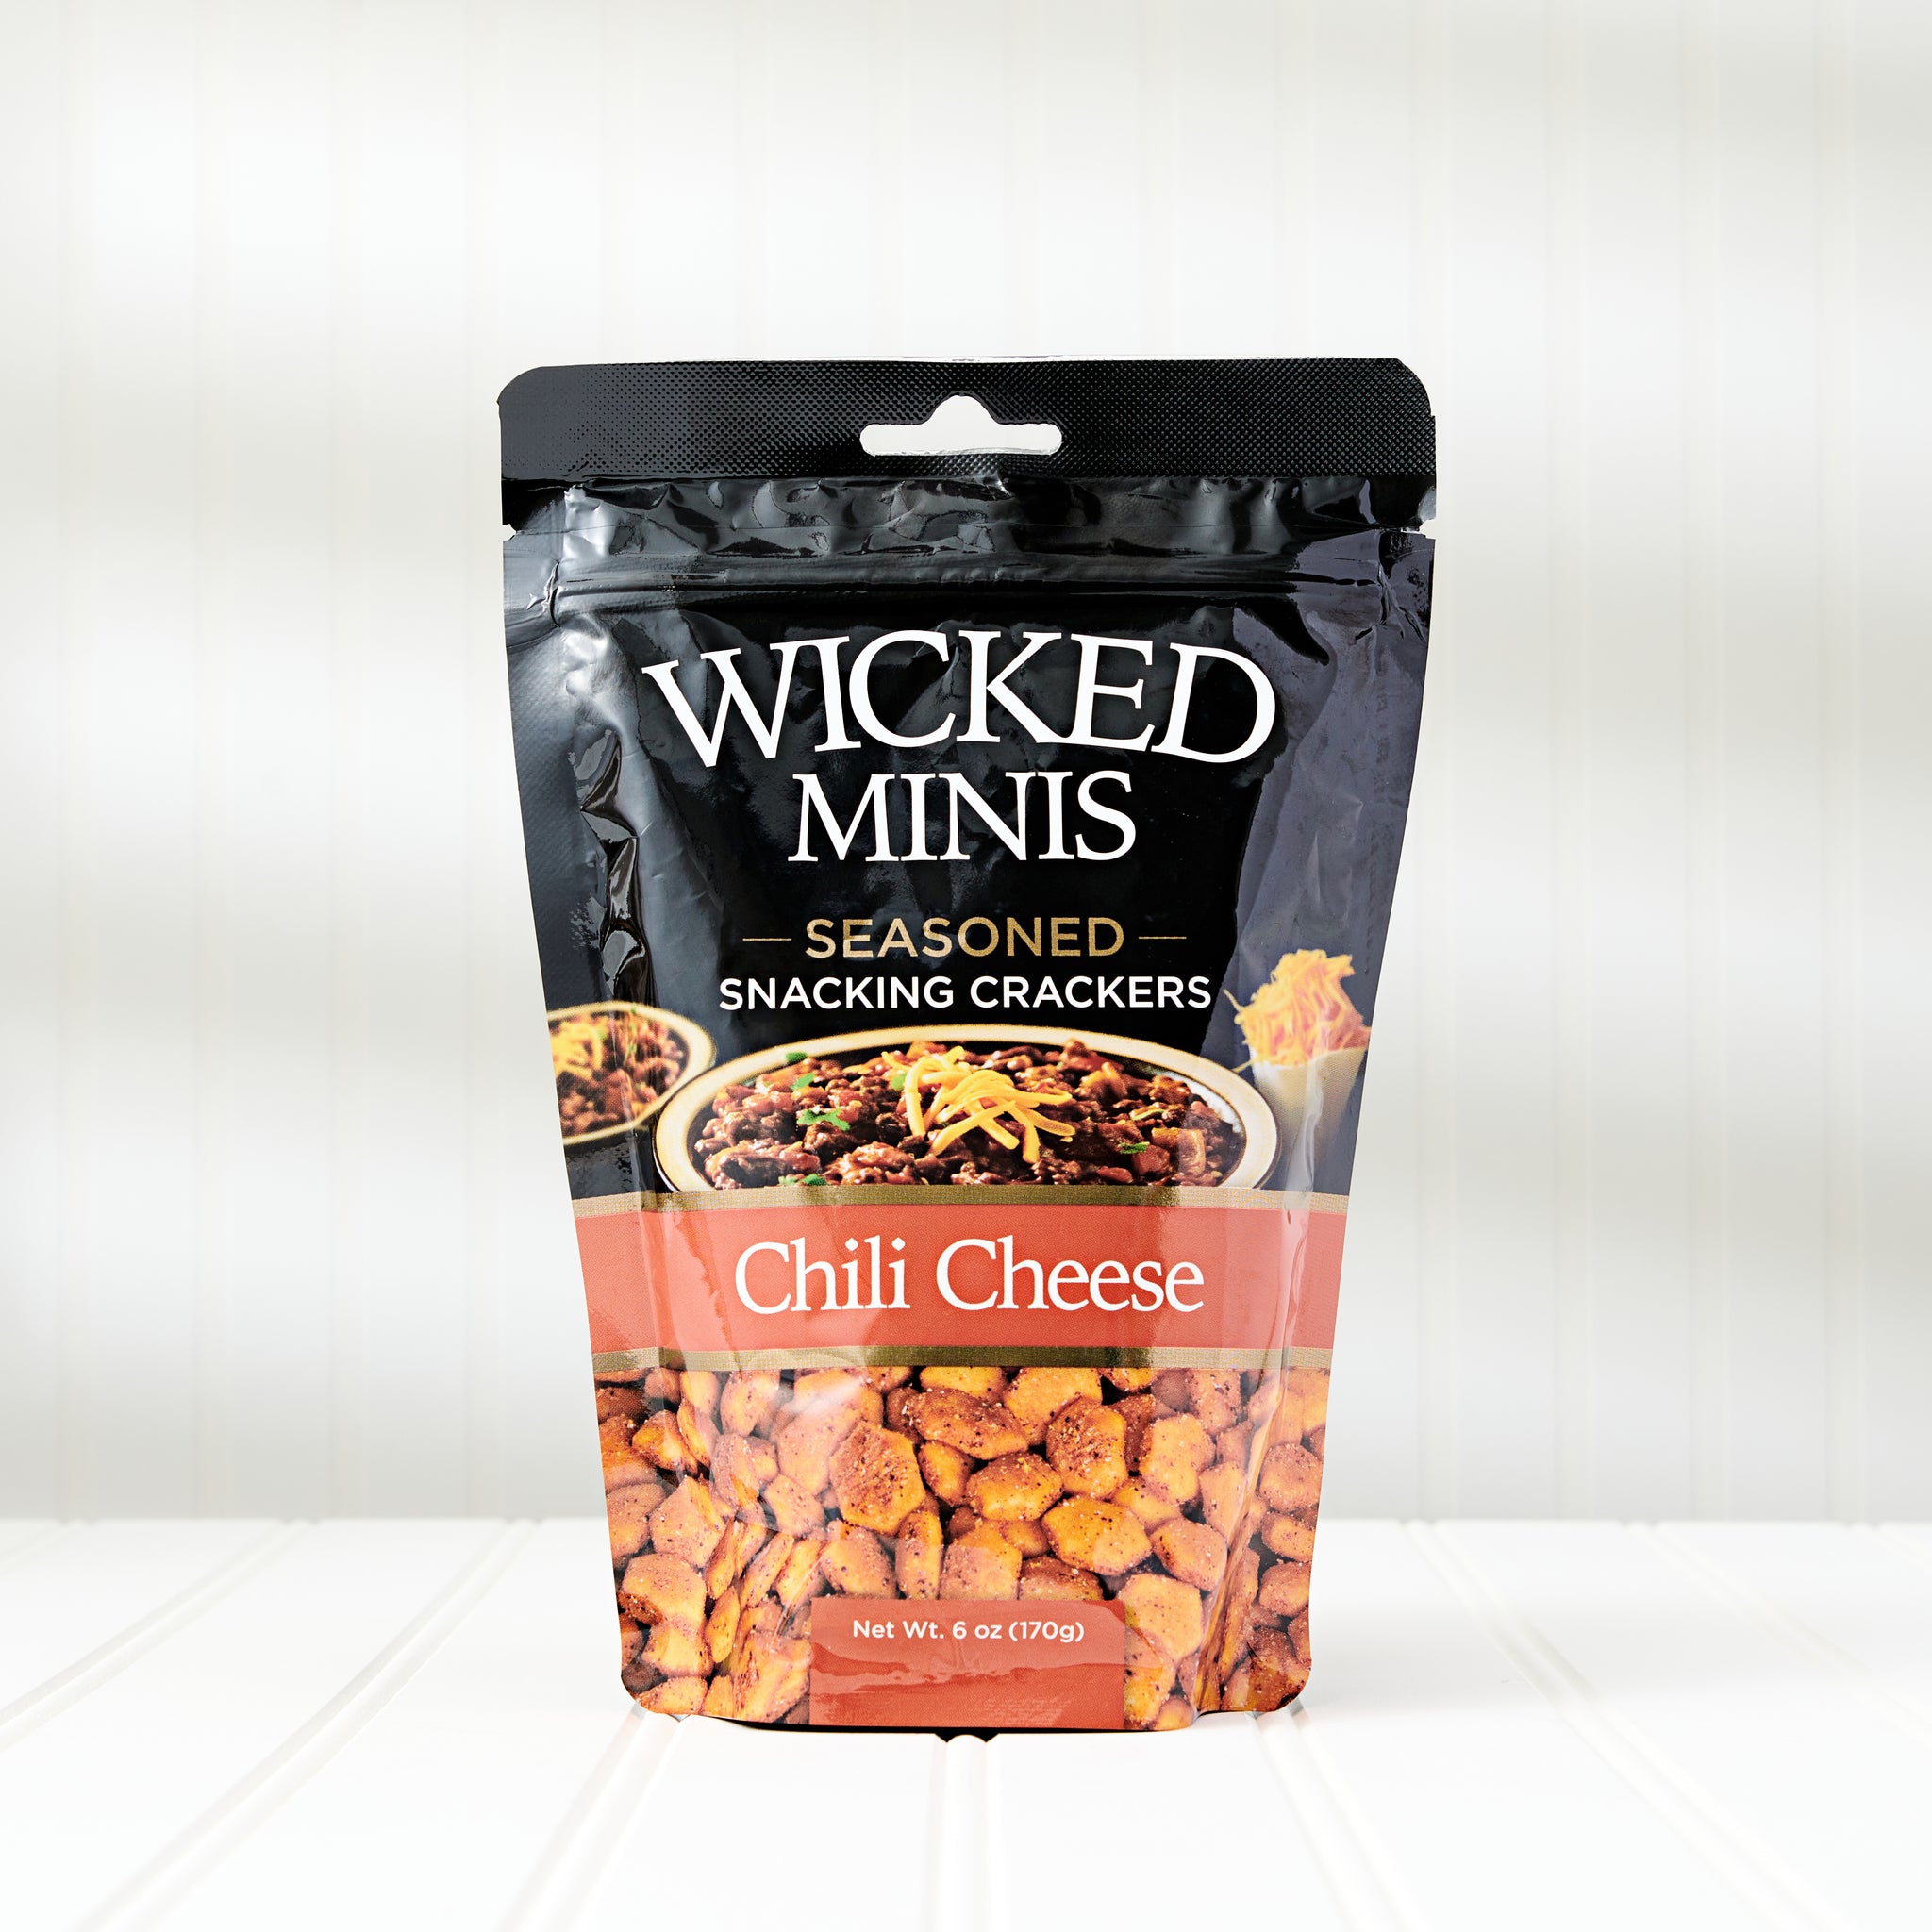 Wicked Minis™ Seasoned Oyster Crackers Chili Cheese